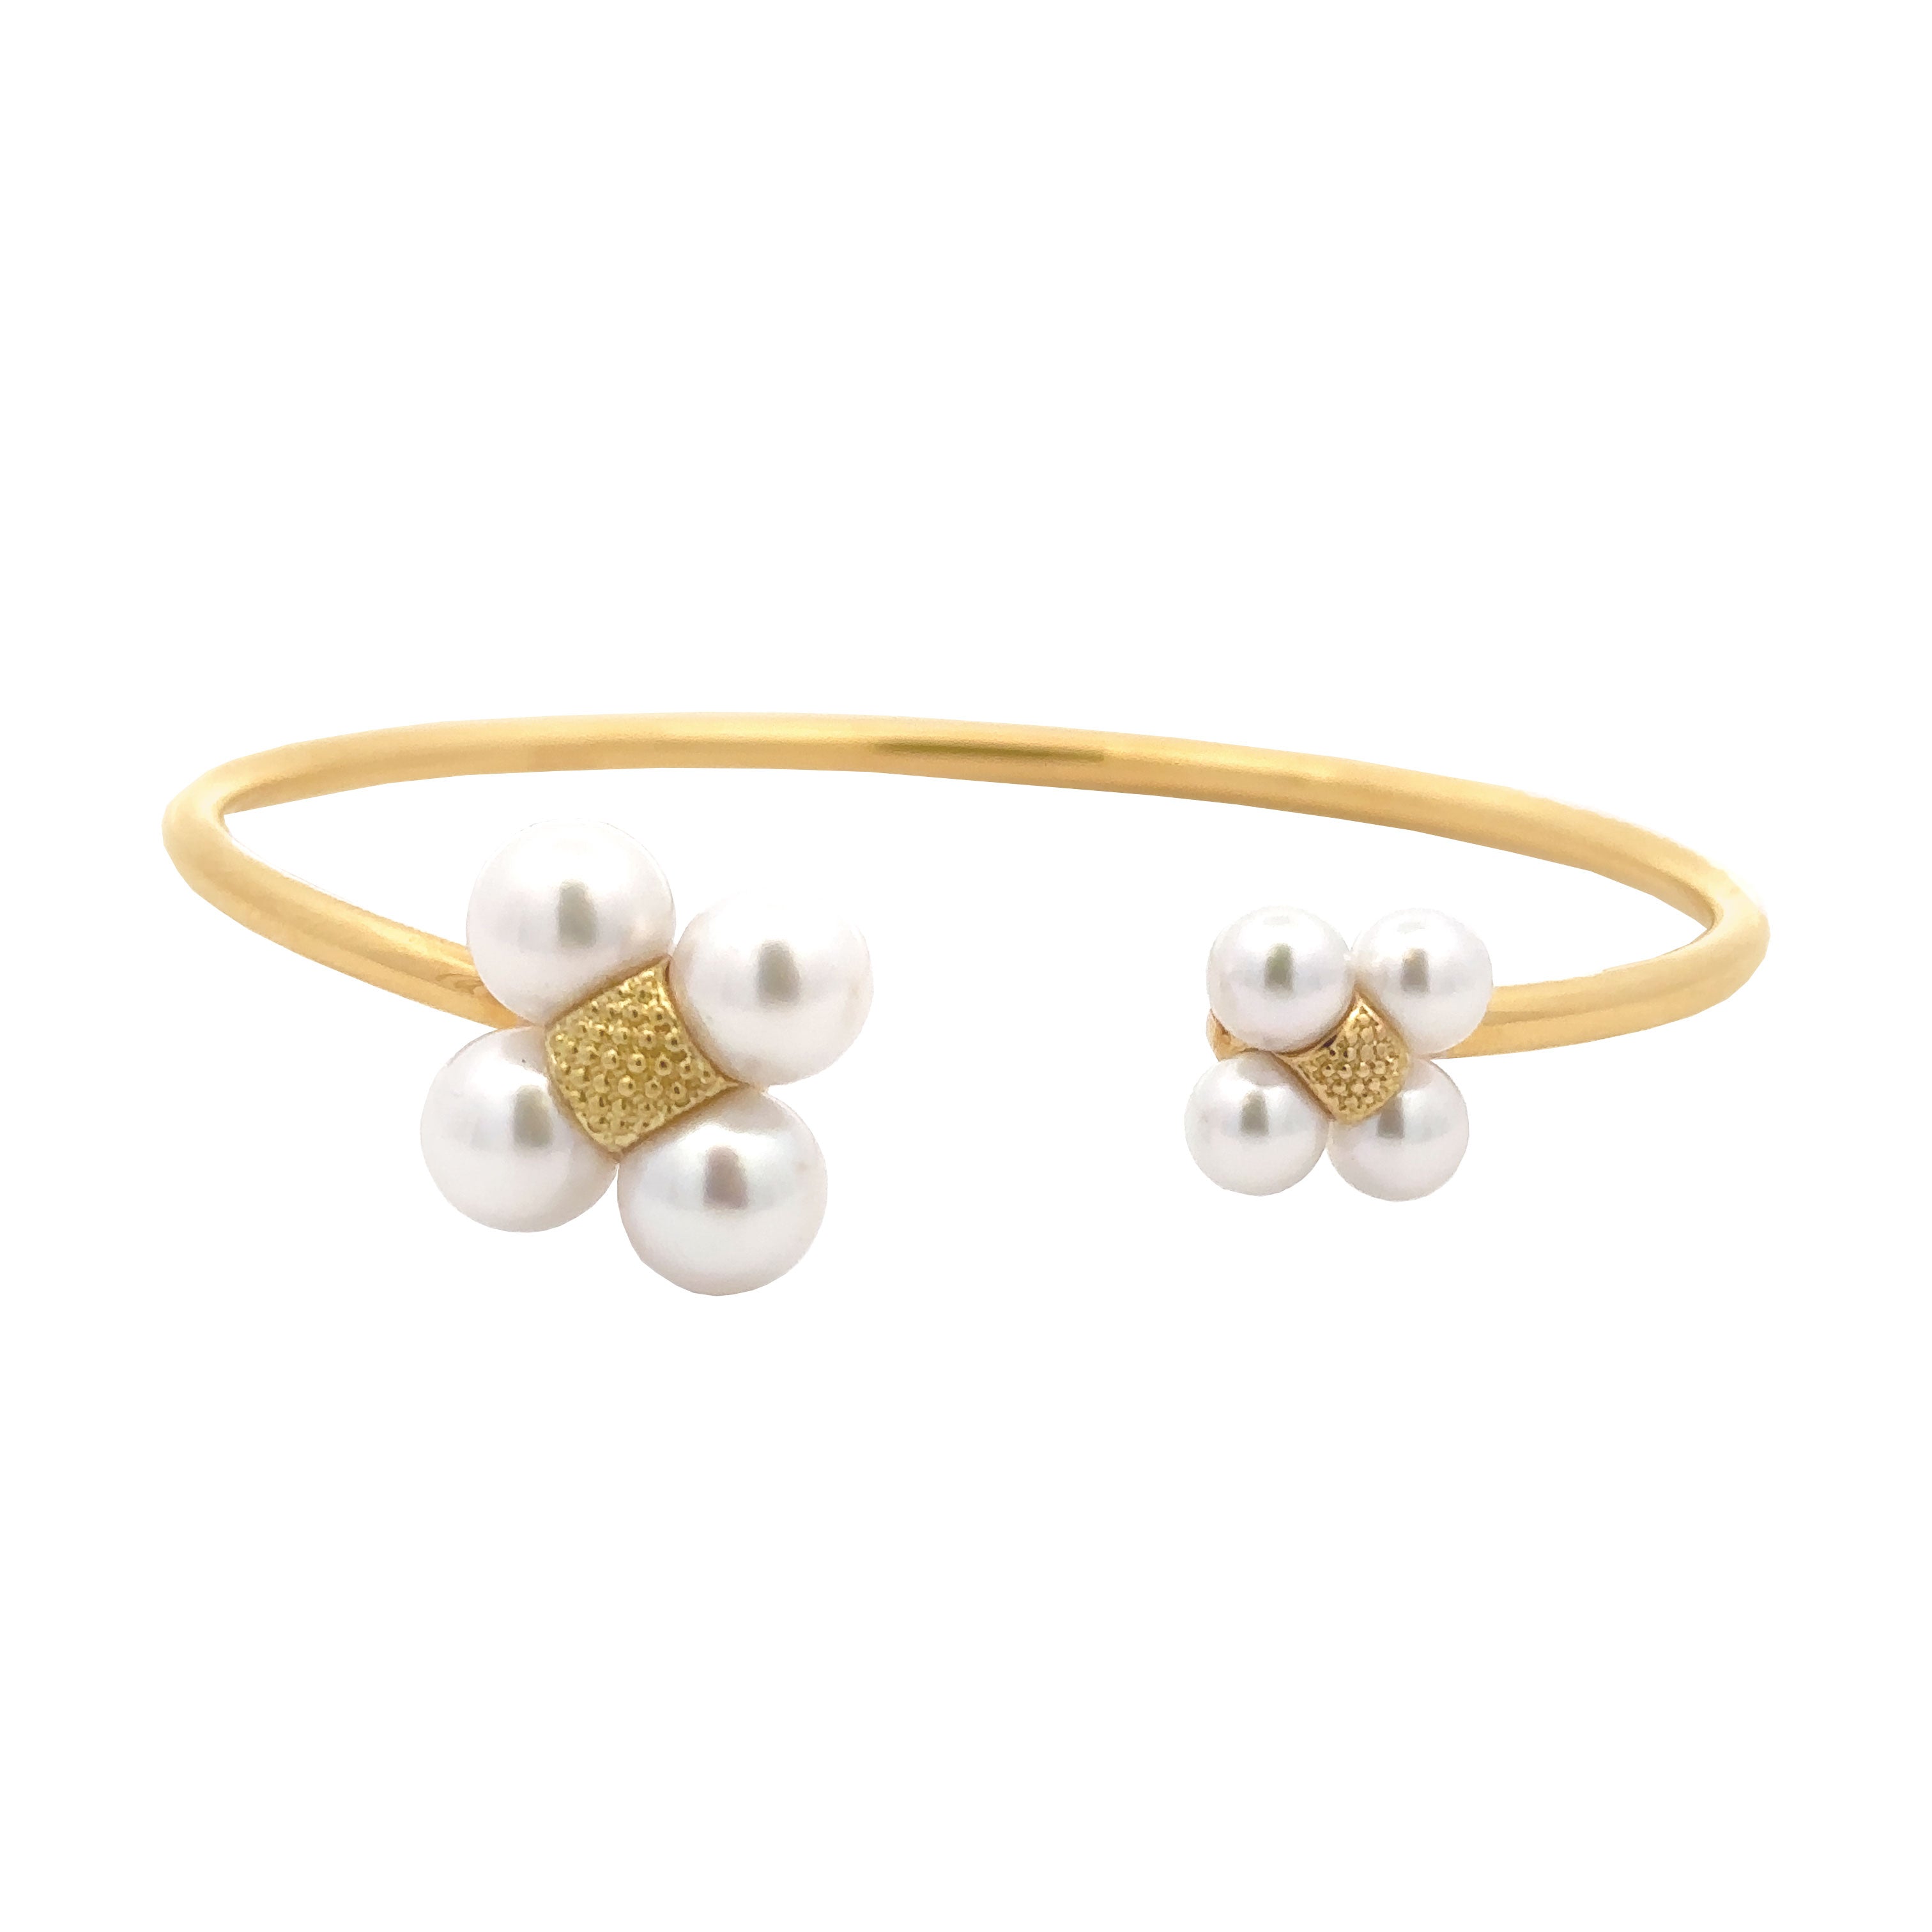 Paul Morelli Pearl Sequence Bracelet - Be On Park